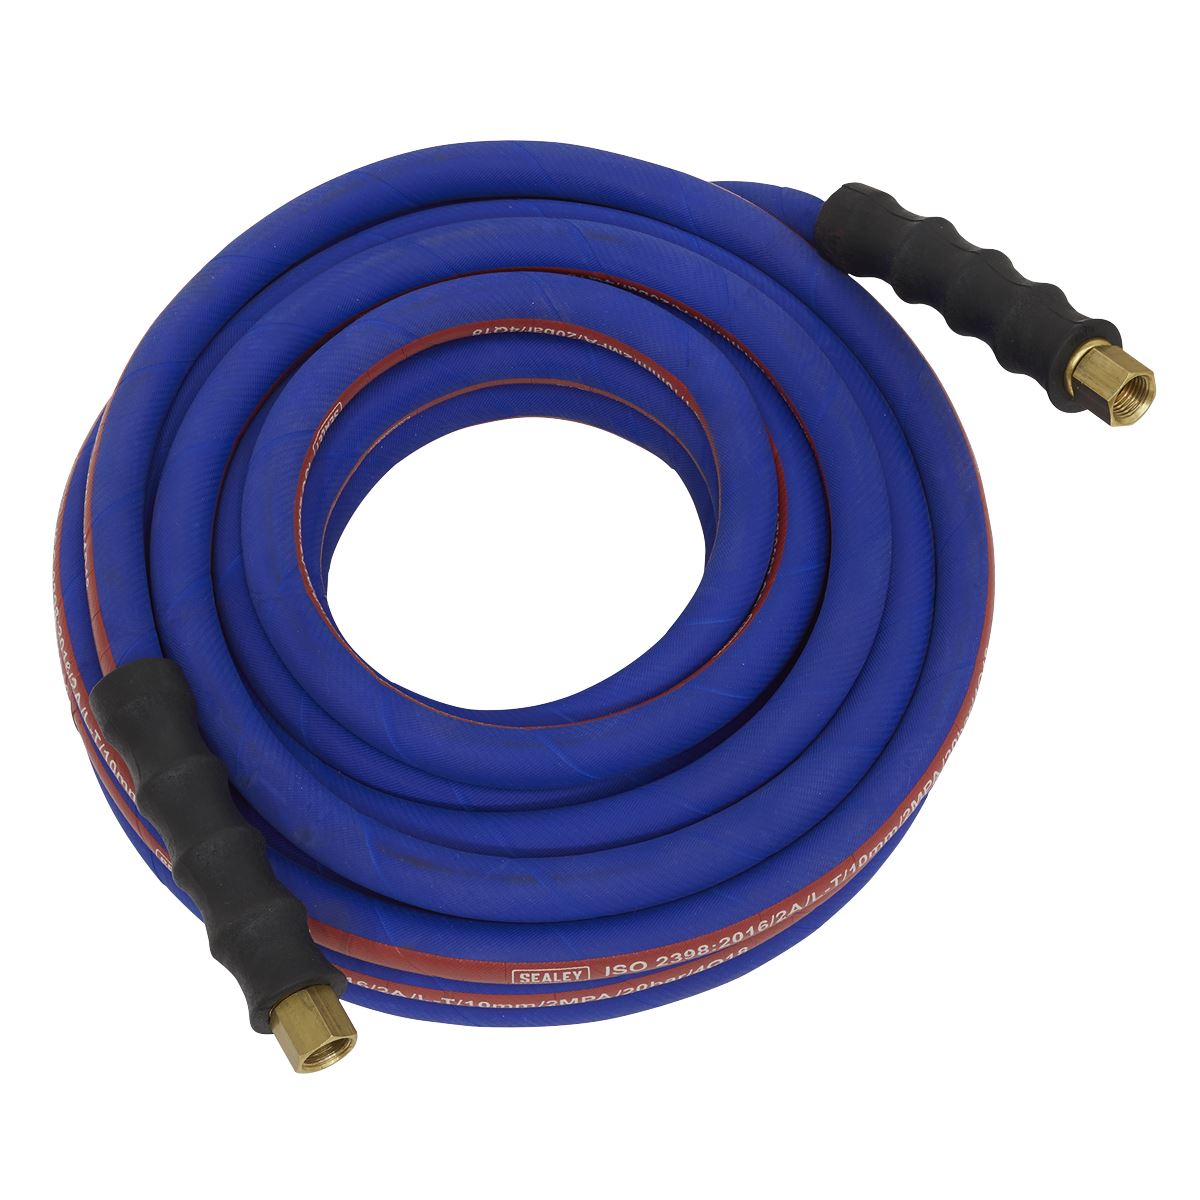 Sealey Air Hose 10m x Ø10mm with 1/4"BSP Unions Extra-Heavy-Duty